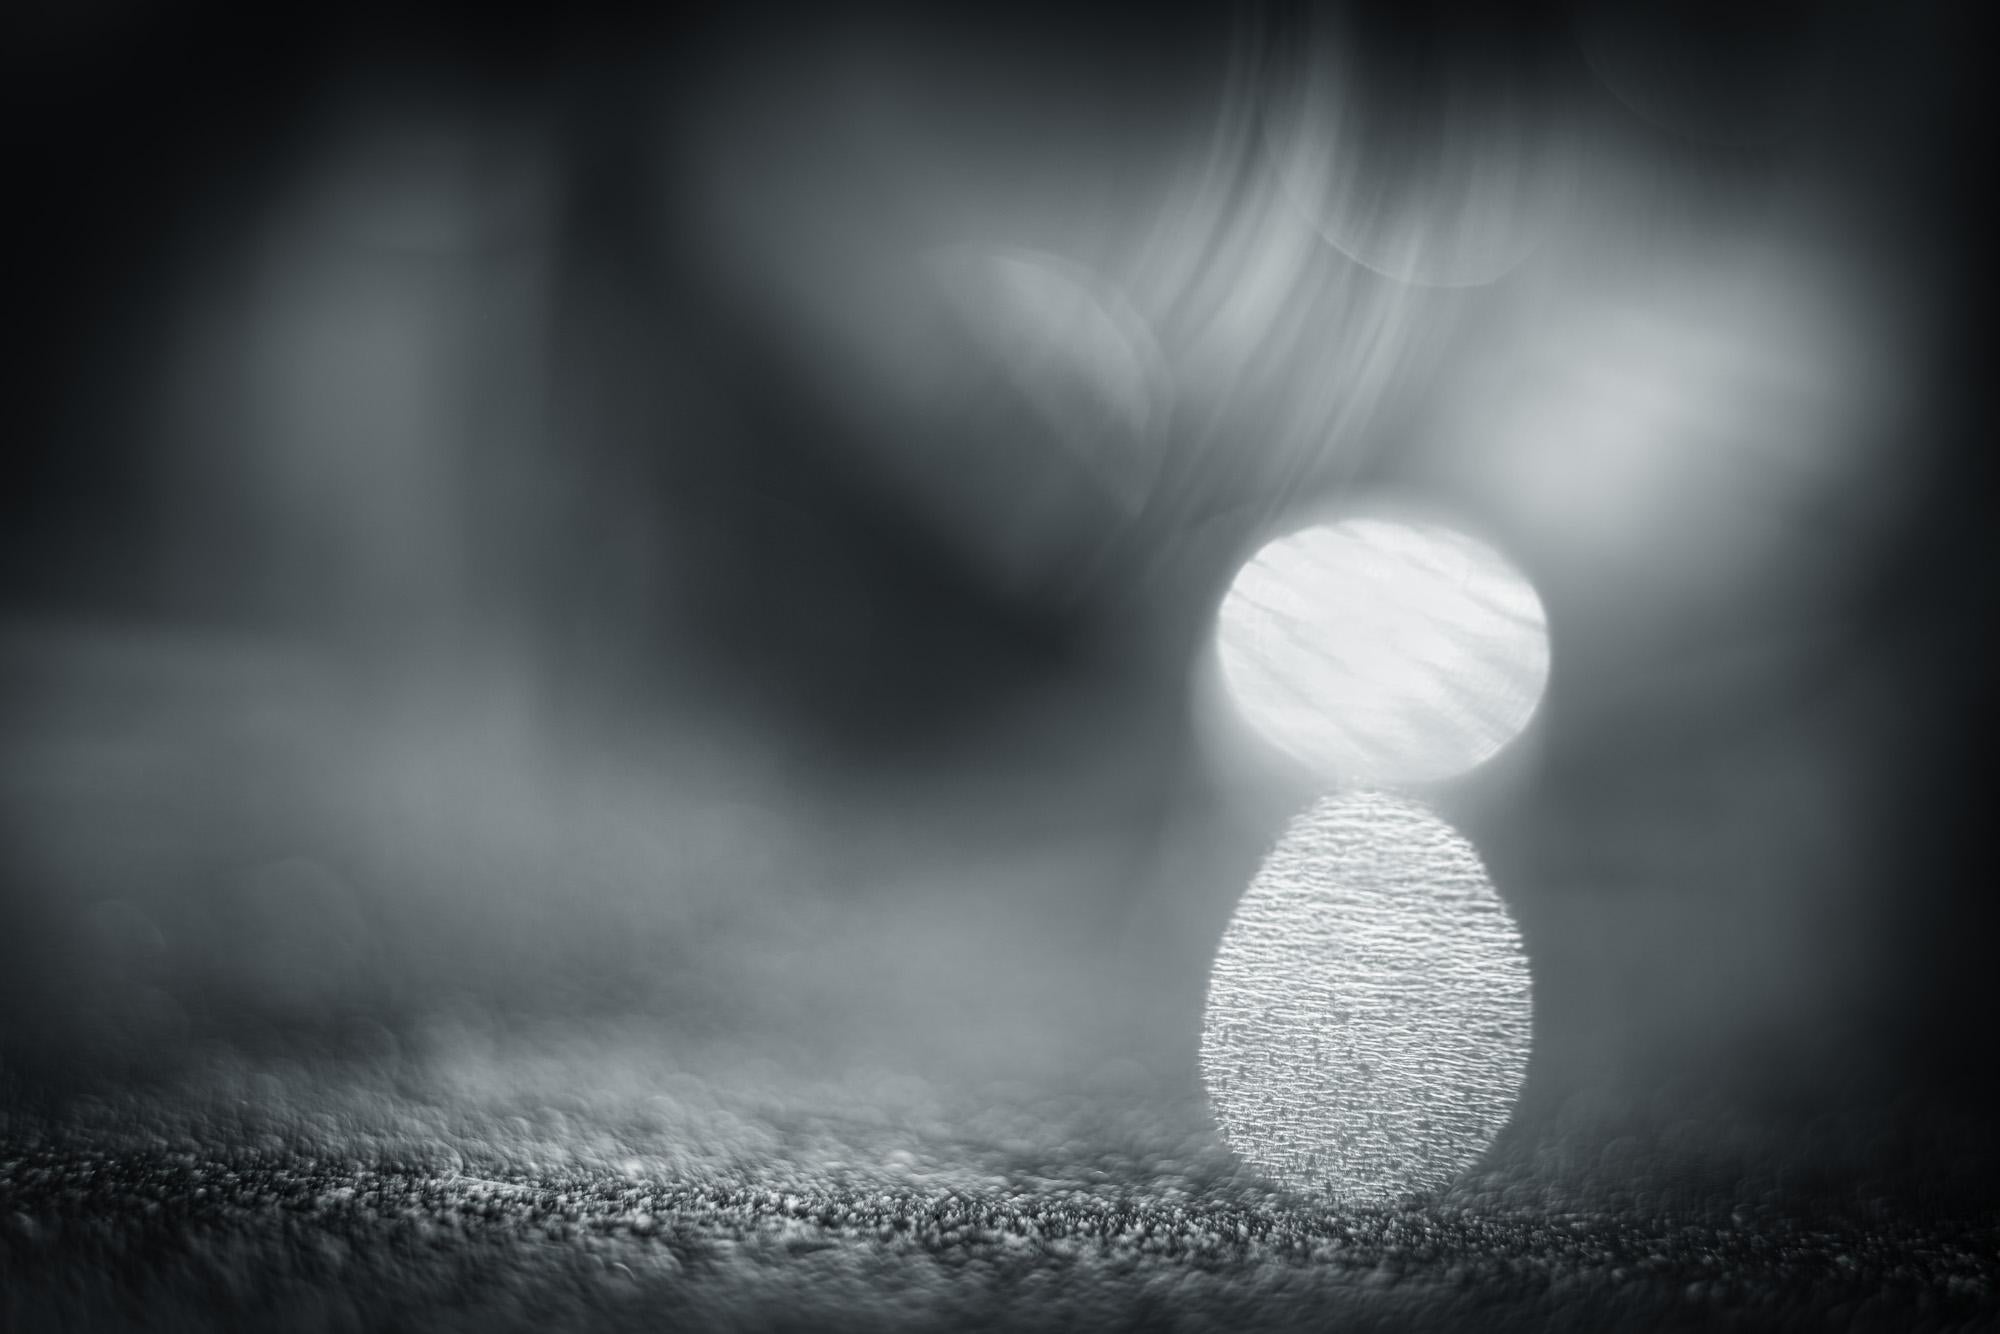 Abstract Black and White Photograph - Nature of Particles #21 For Sale 1